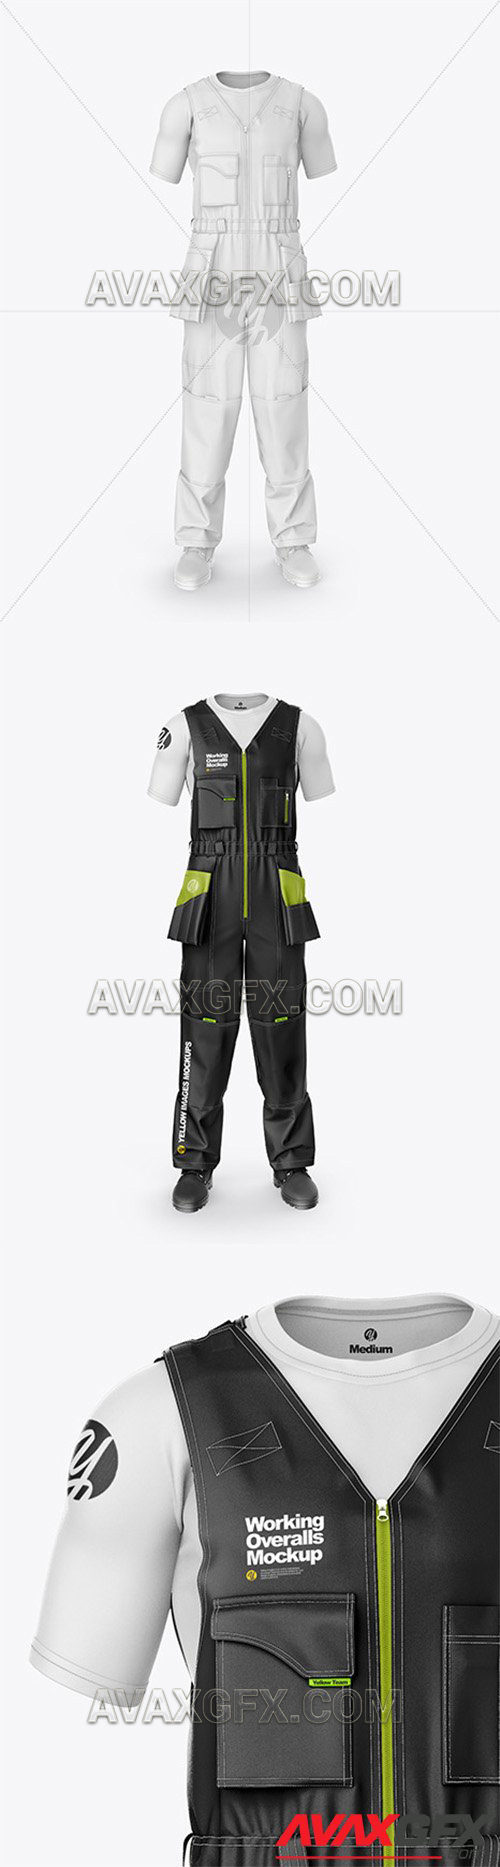 Working Overalls Mockup – Front View 58406